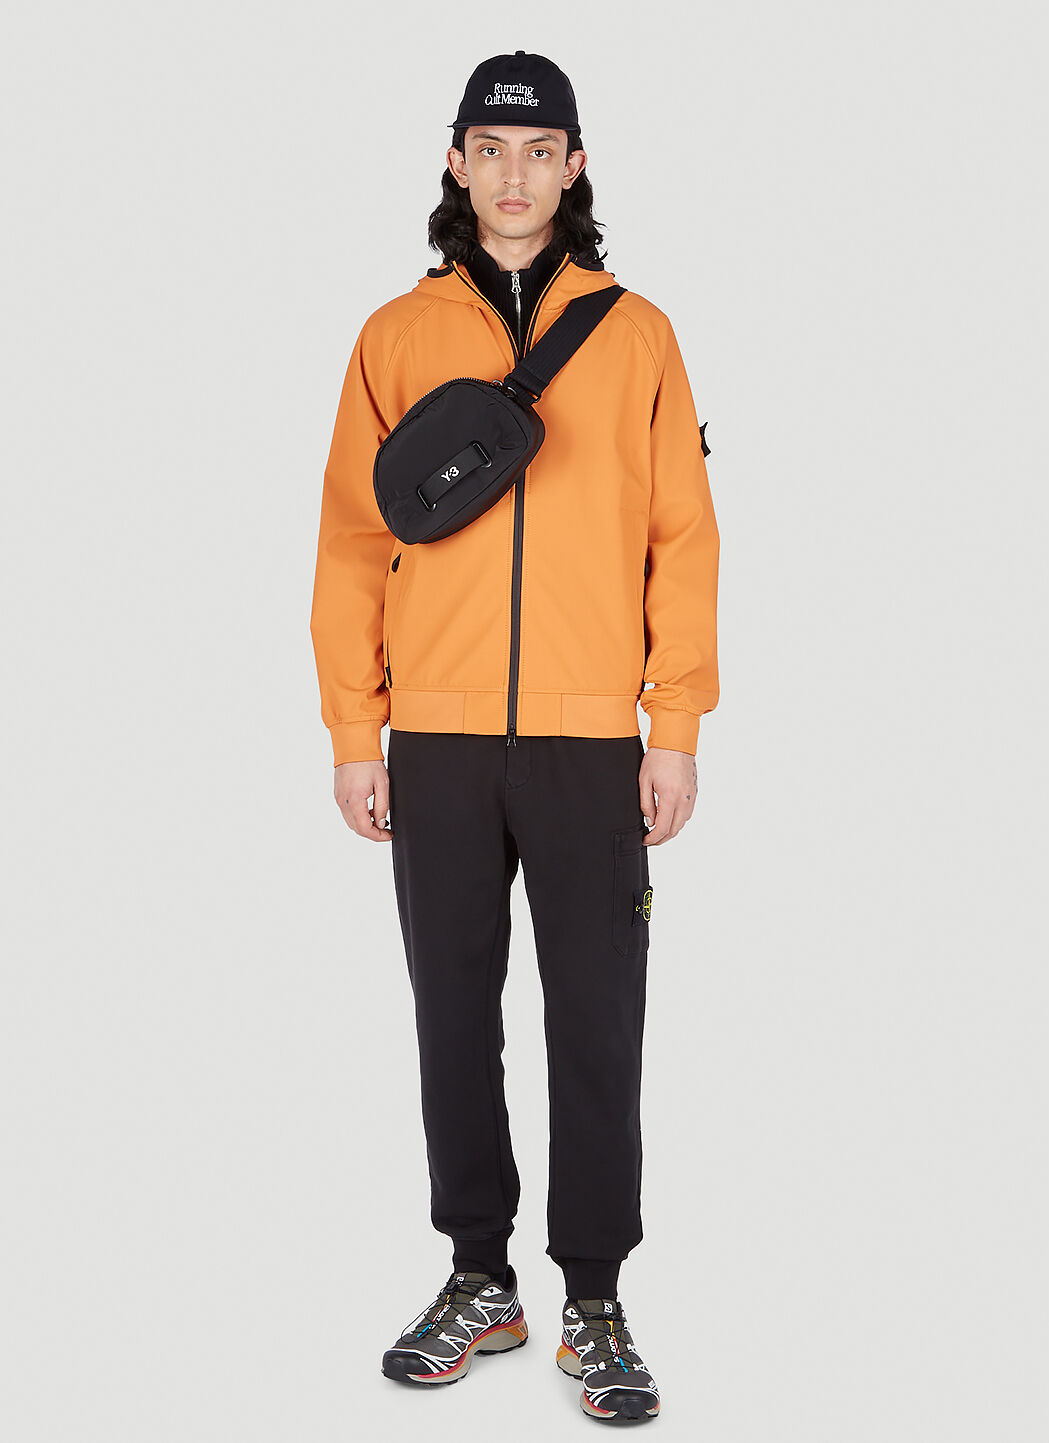 Stone Island Compass Patch Hooded Jacket in Orange | LN-CC®